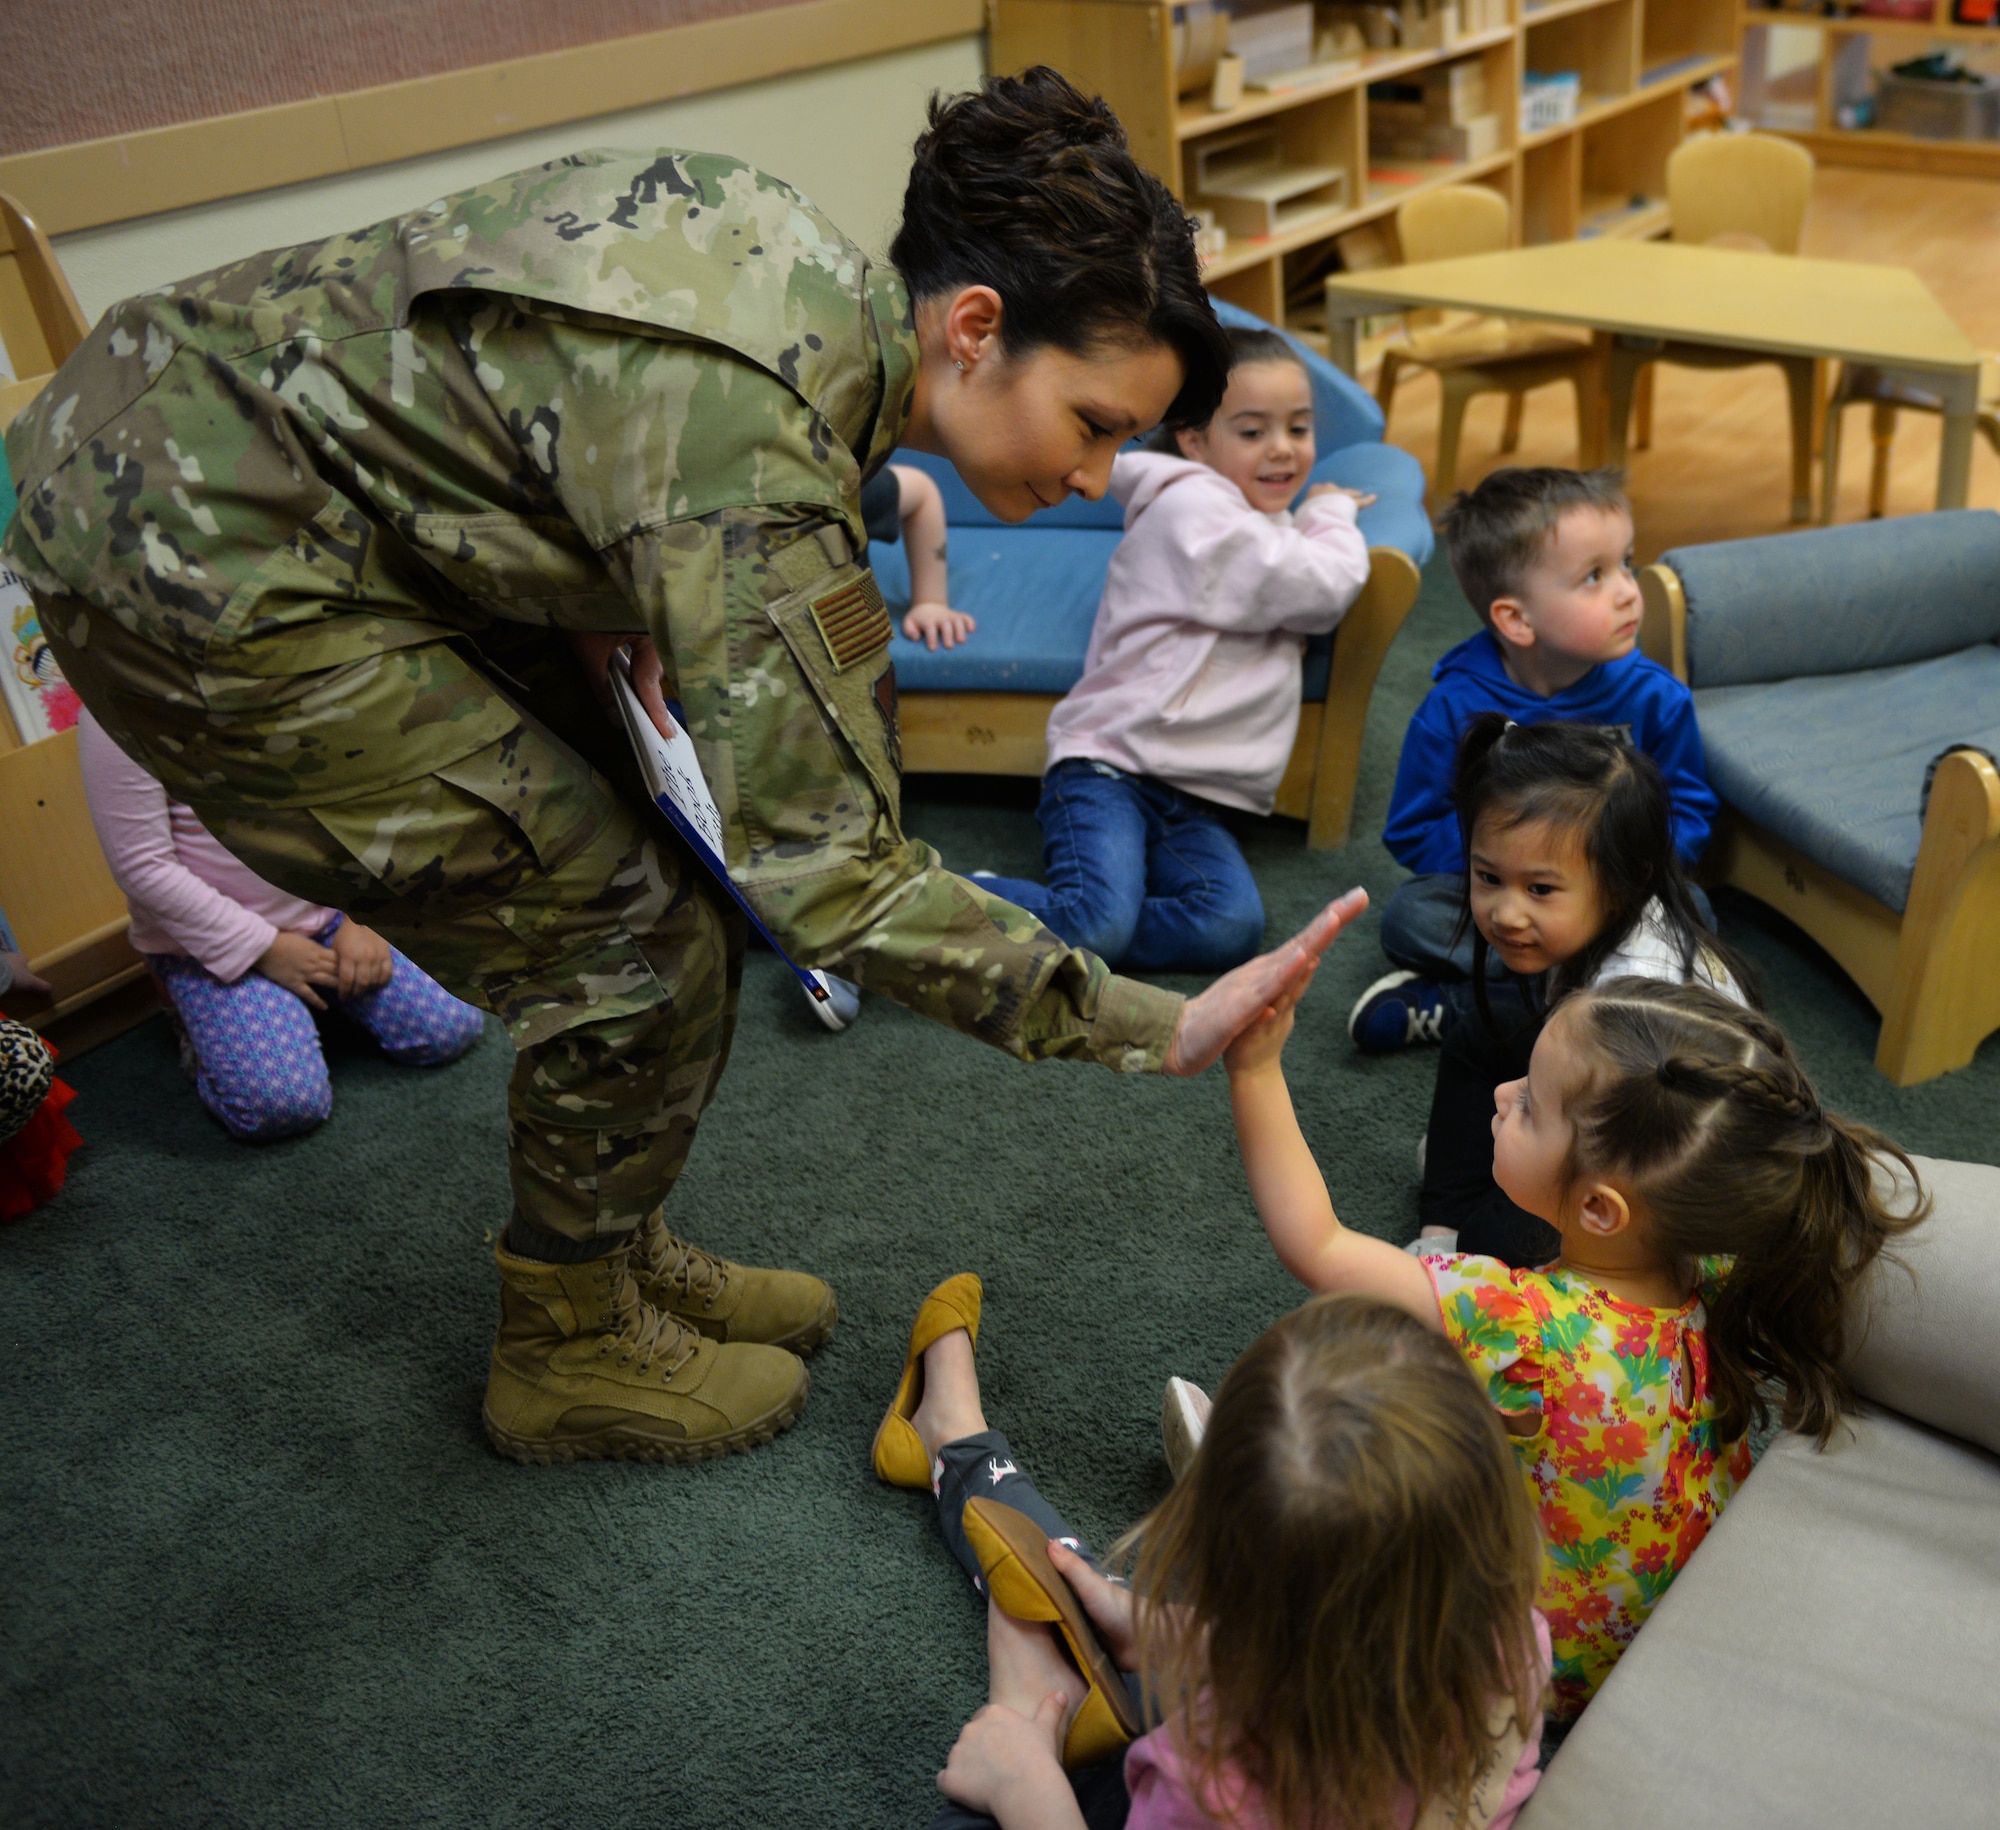 U.S. Air Force Col. Patricia Csànk, Joint Base Elmendorf-Richardson and 673d Air Base Wing commander, says goodbye to kids at the Denali Child Development Center April 8, 2019, at JBER, Alaska. In honor of Month of the Military Child, Csànk visited the Denali Child Development Center at JBER to read to some of the children. Out the selection of four books, the kids elected to read “The Book With No Pictures,” by B.J. Novak, knowing all too well what this piece of literature would have Csànk reading aloud.